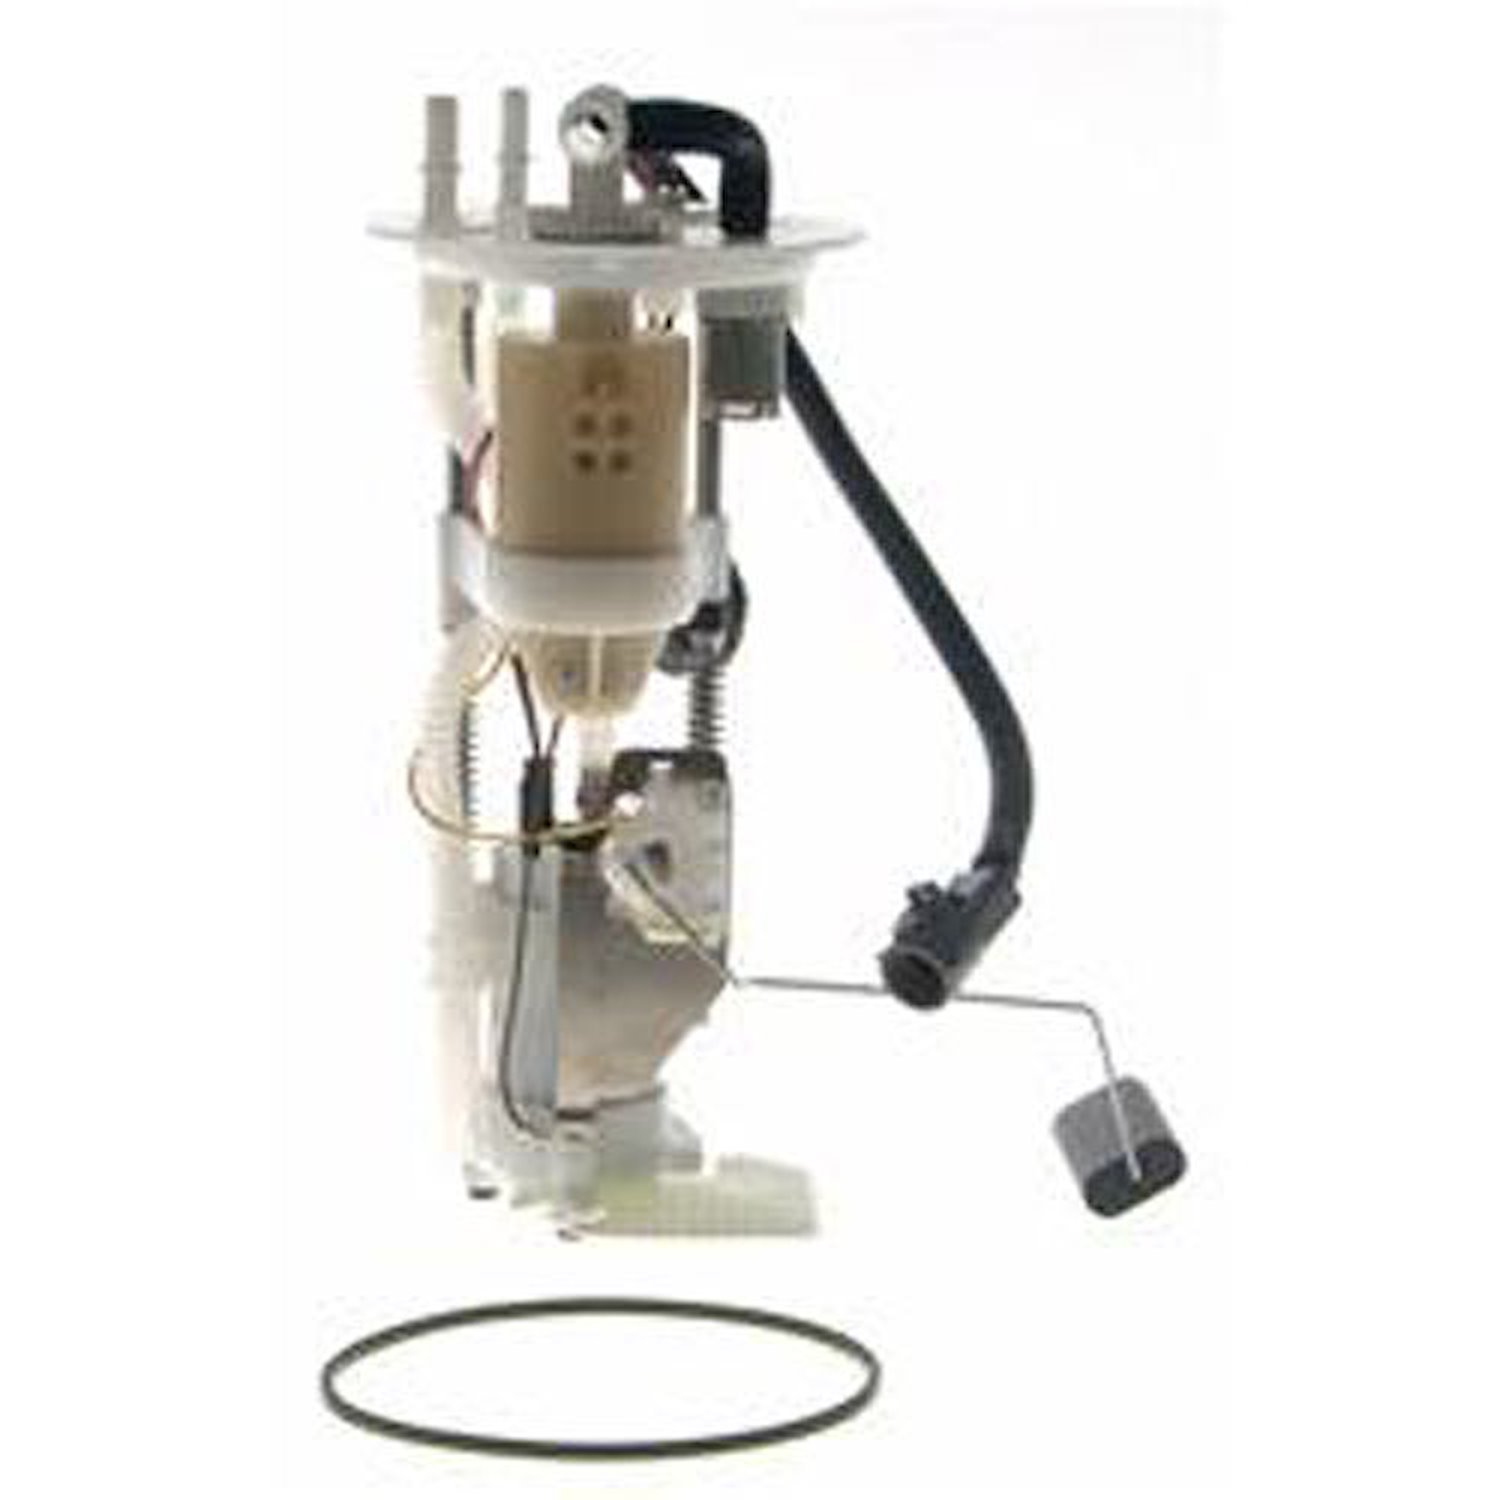 OE Ford Replacement Electric Fuel Pump Module Assembly 2002-03 Ford Explorer 4.0L V6